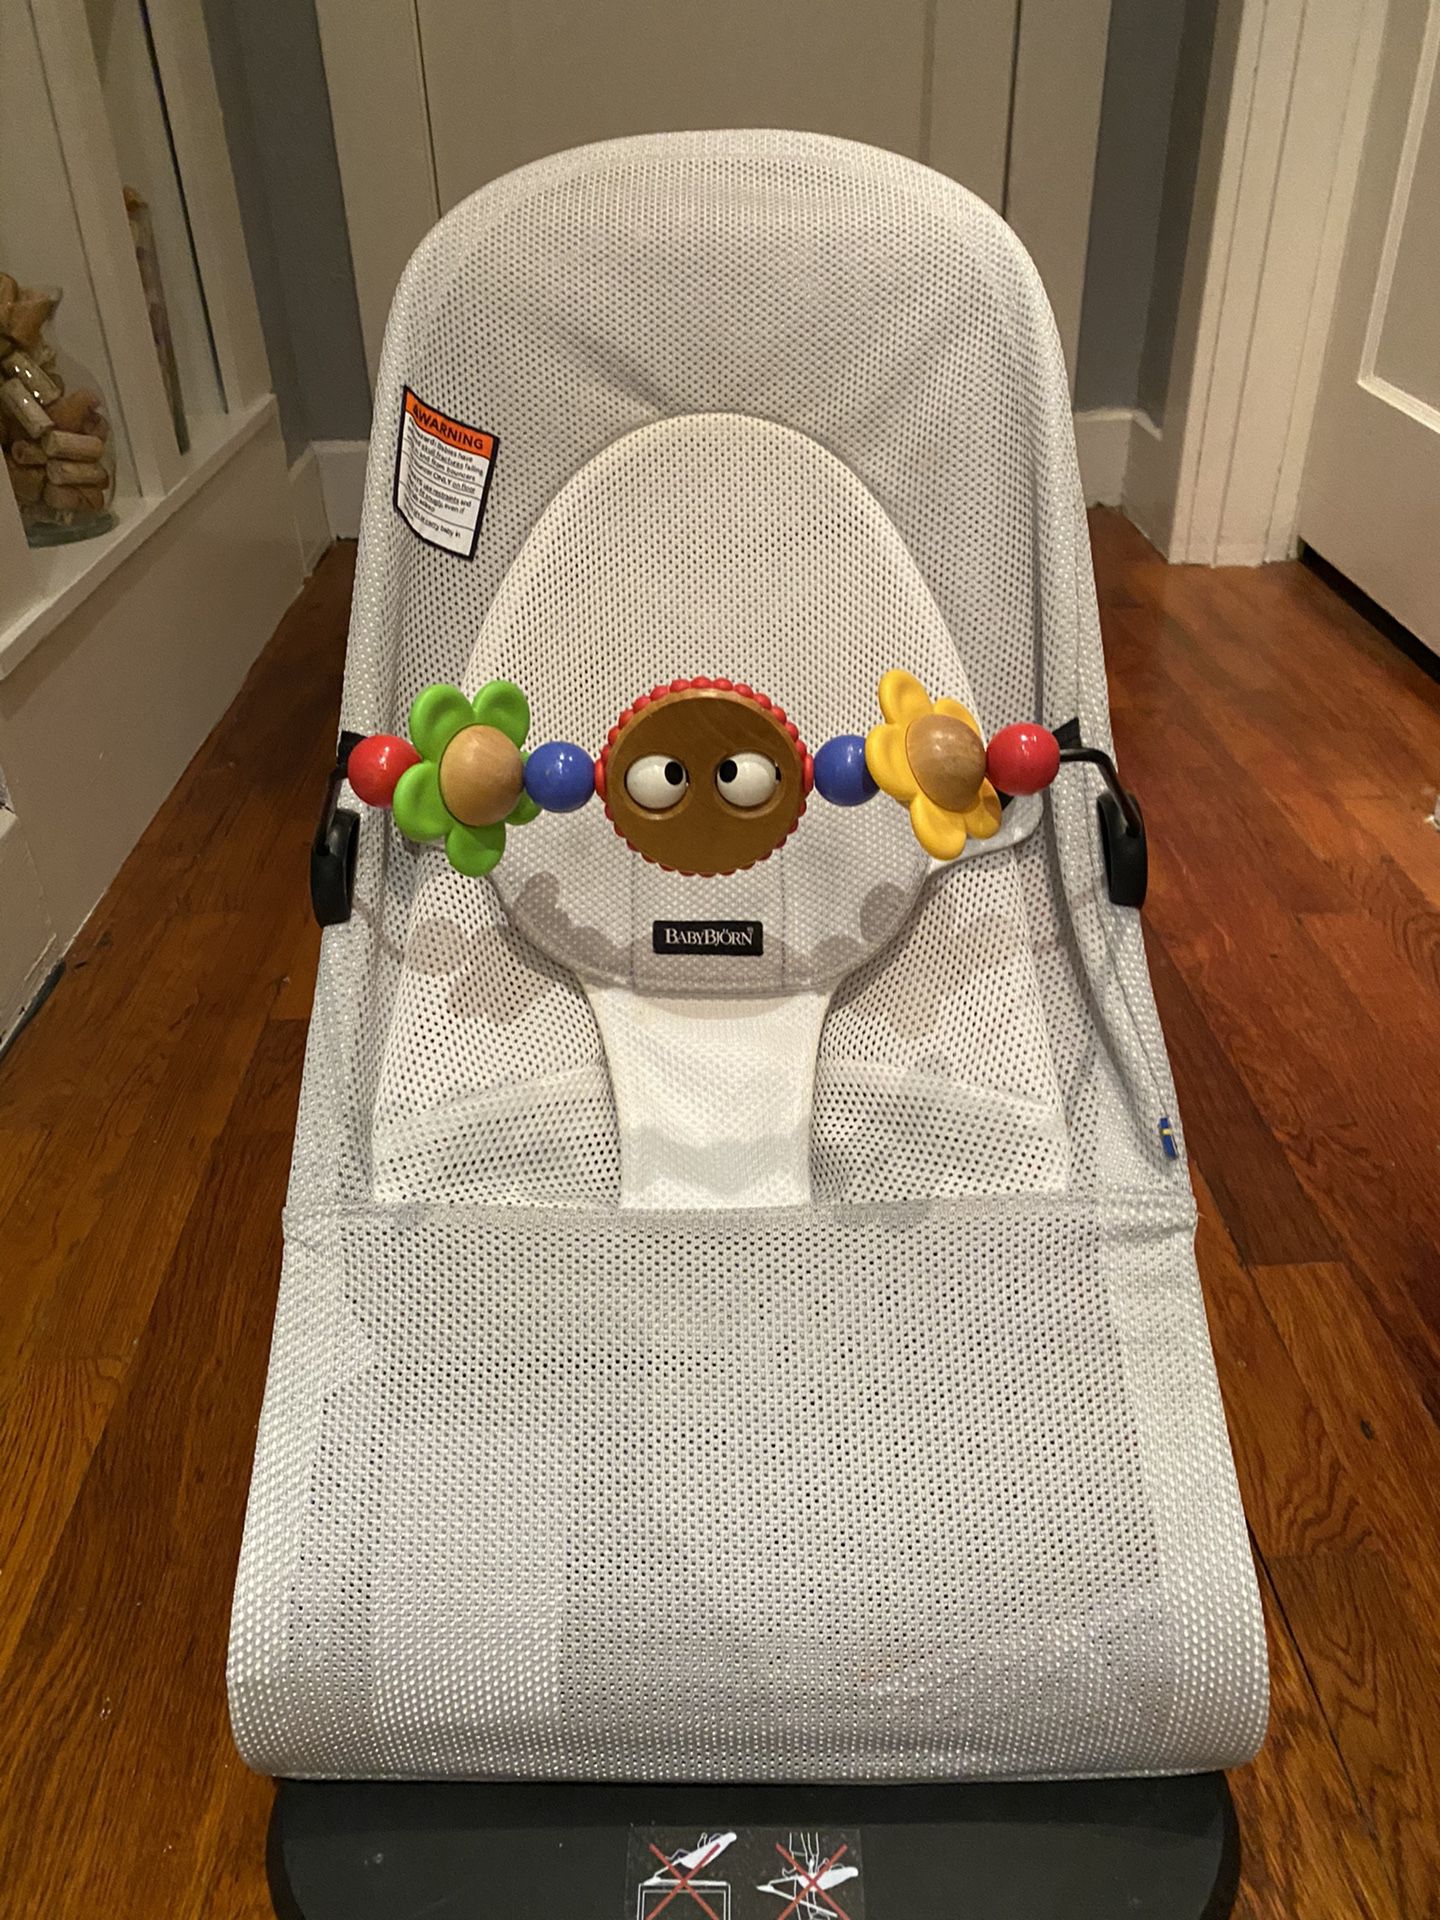 BABYBJÖRN® Bouncer Balance Soft in Silver/White Mesh with Google Eyes Toy Bar